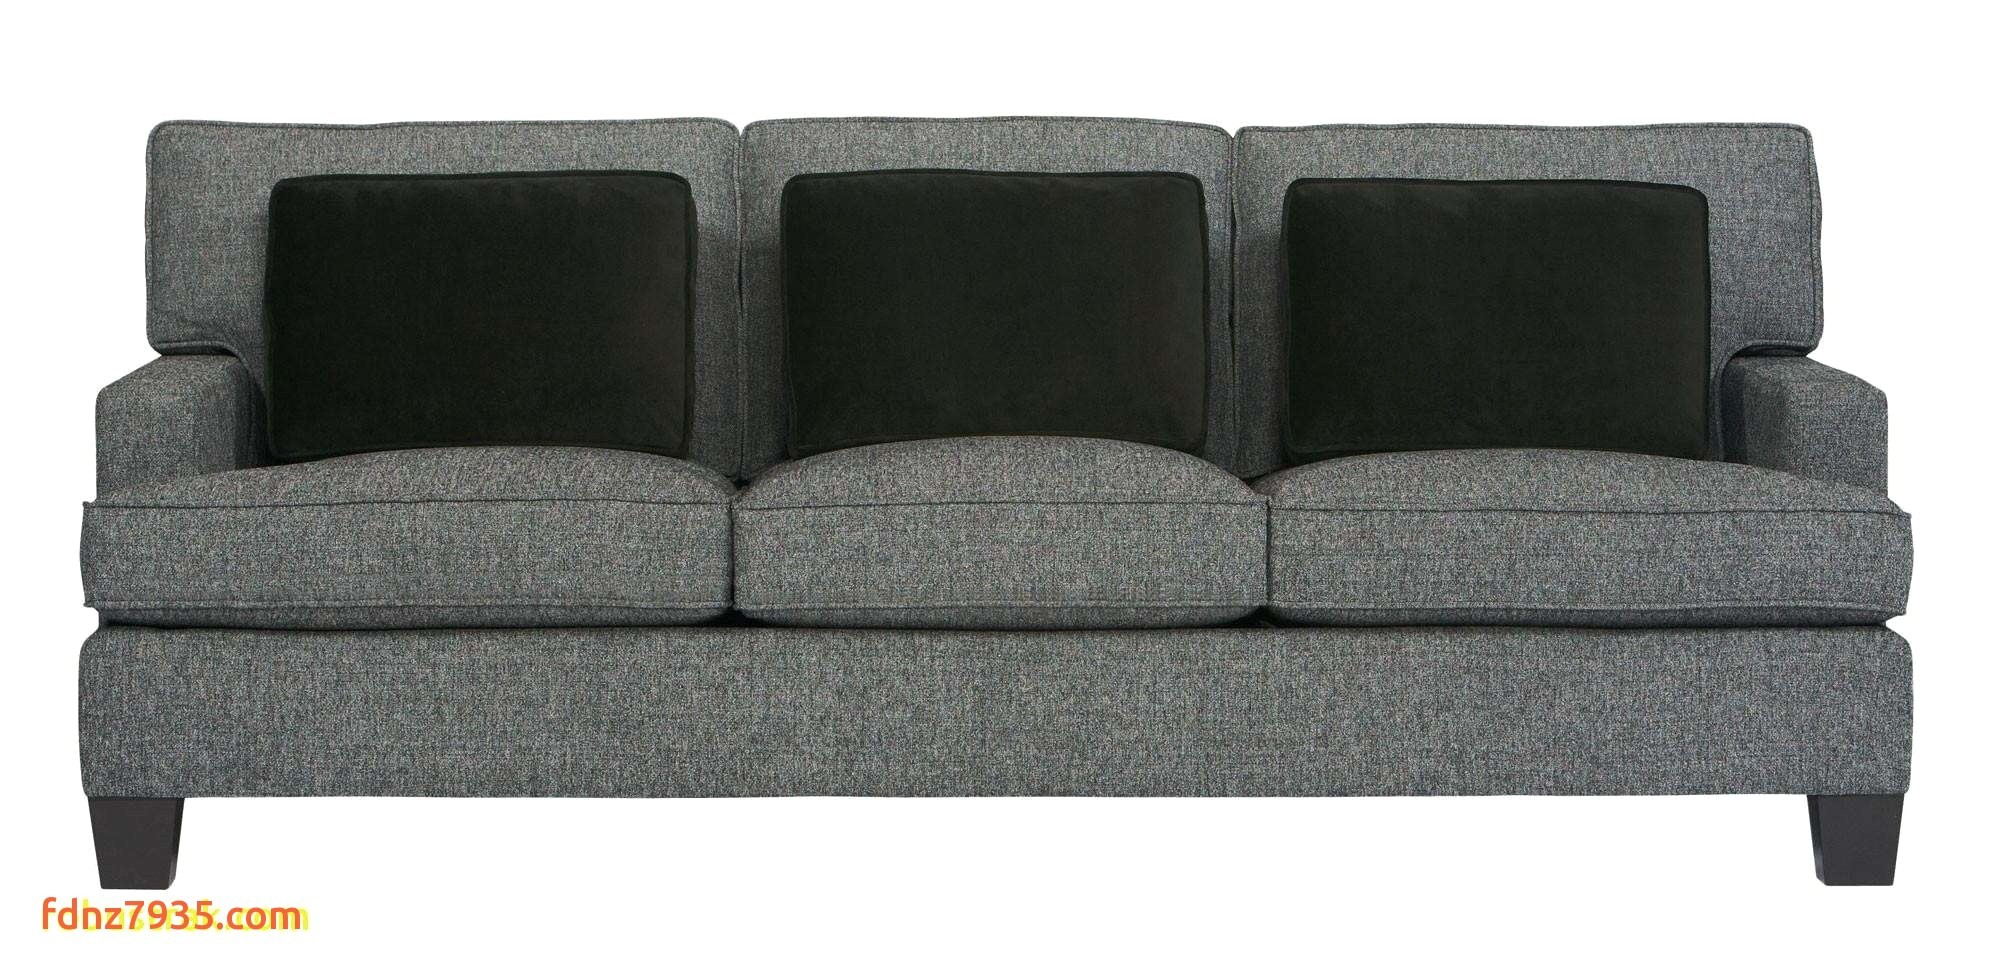 jcpenney sofa bed beautiful furniture sleeper loveseat new wicker outdoor sofa 0d patio jcpenney sofa